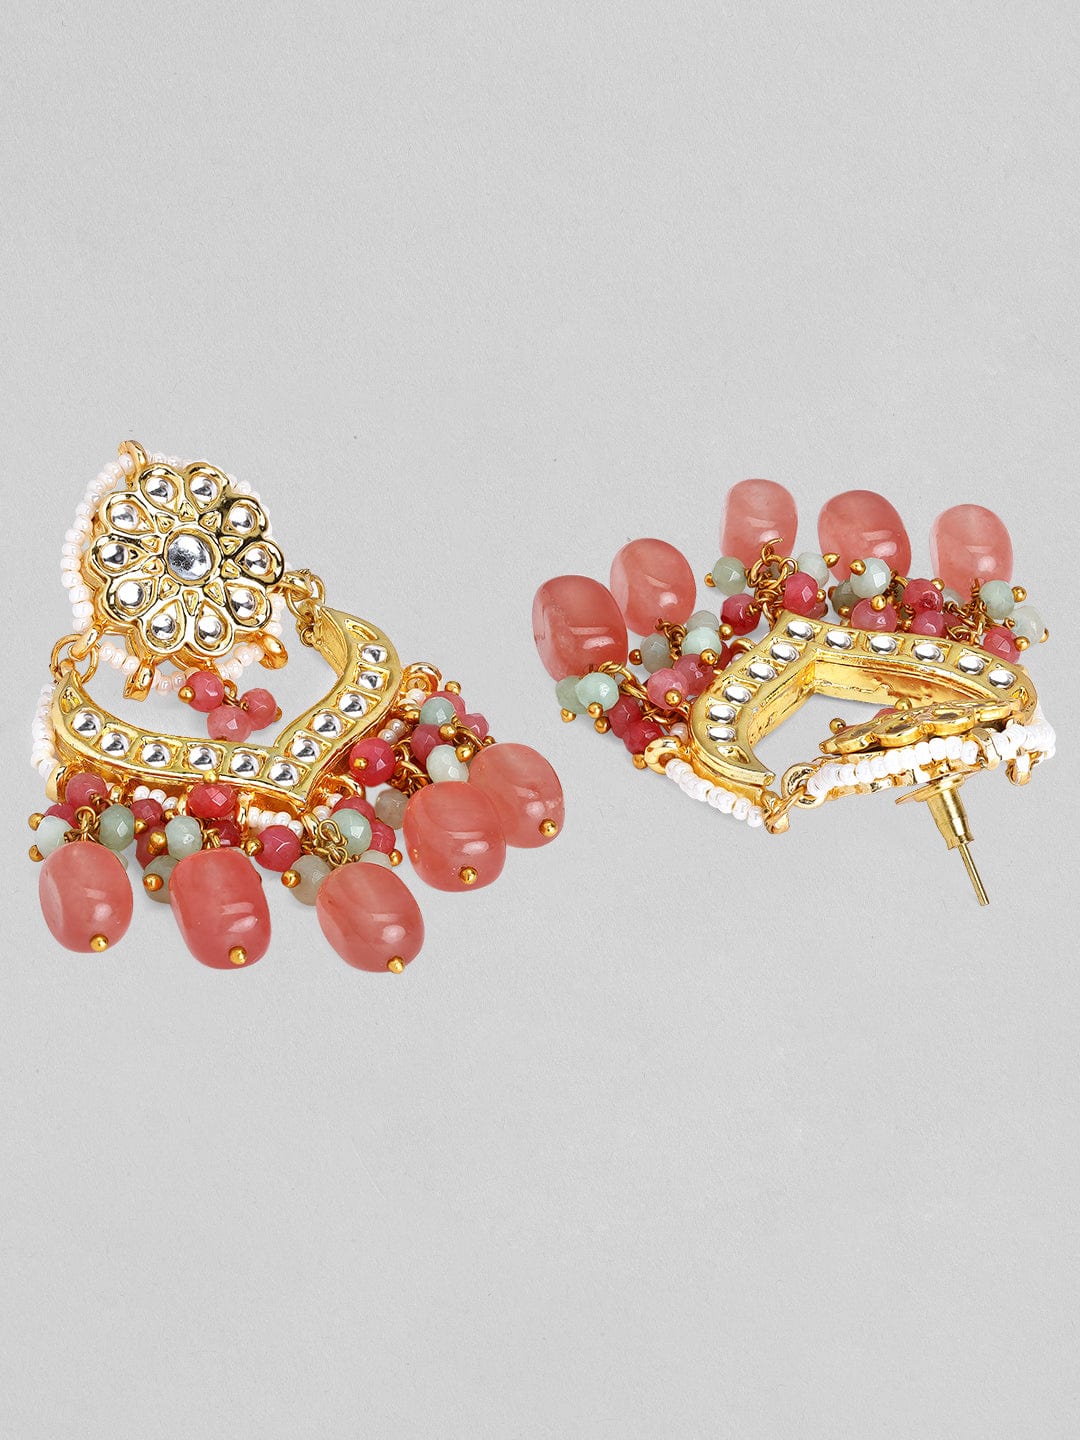 Share more than 202 22k gold coral earrings